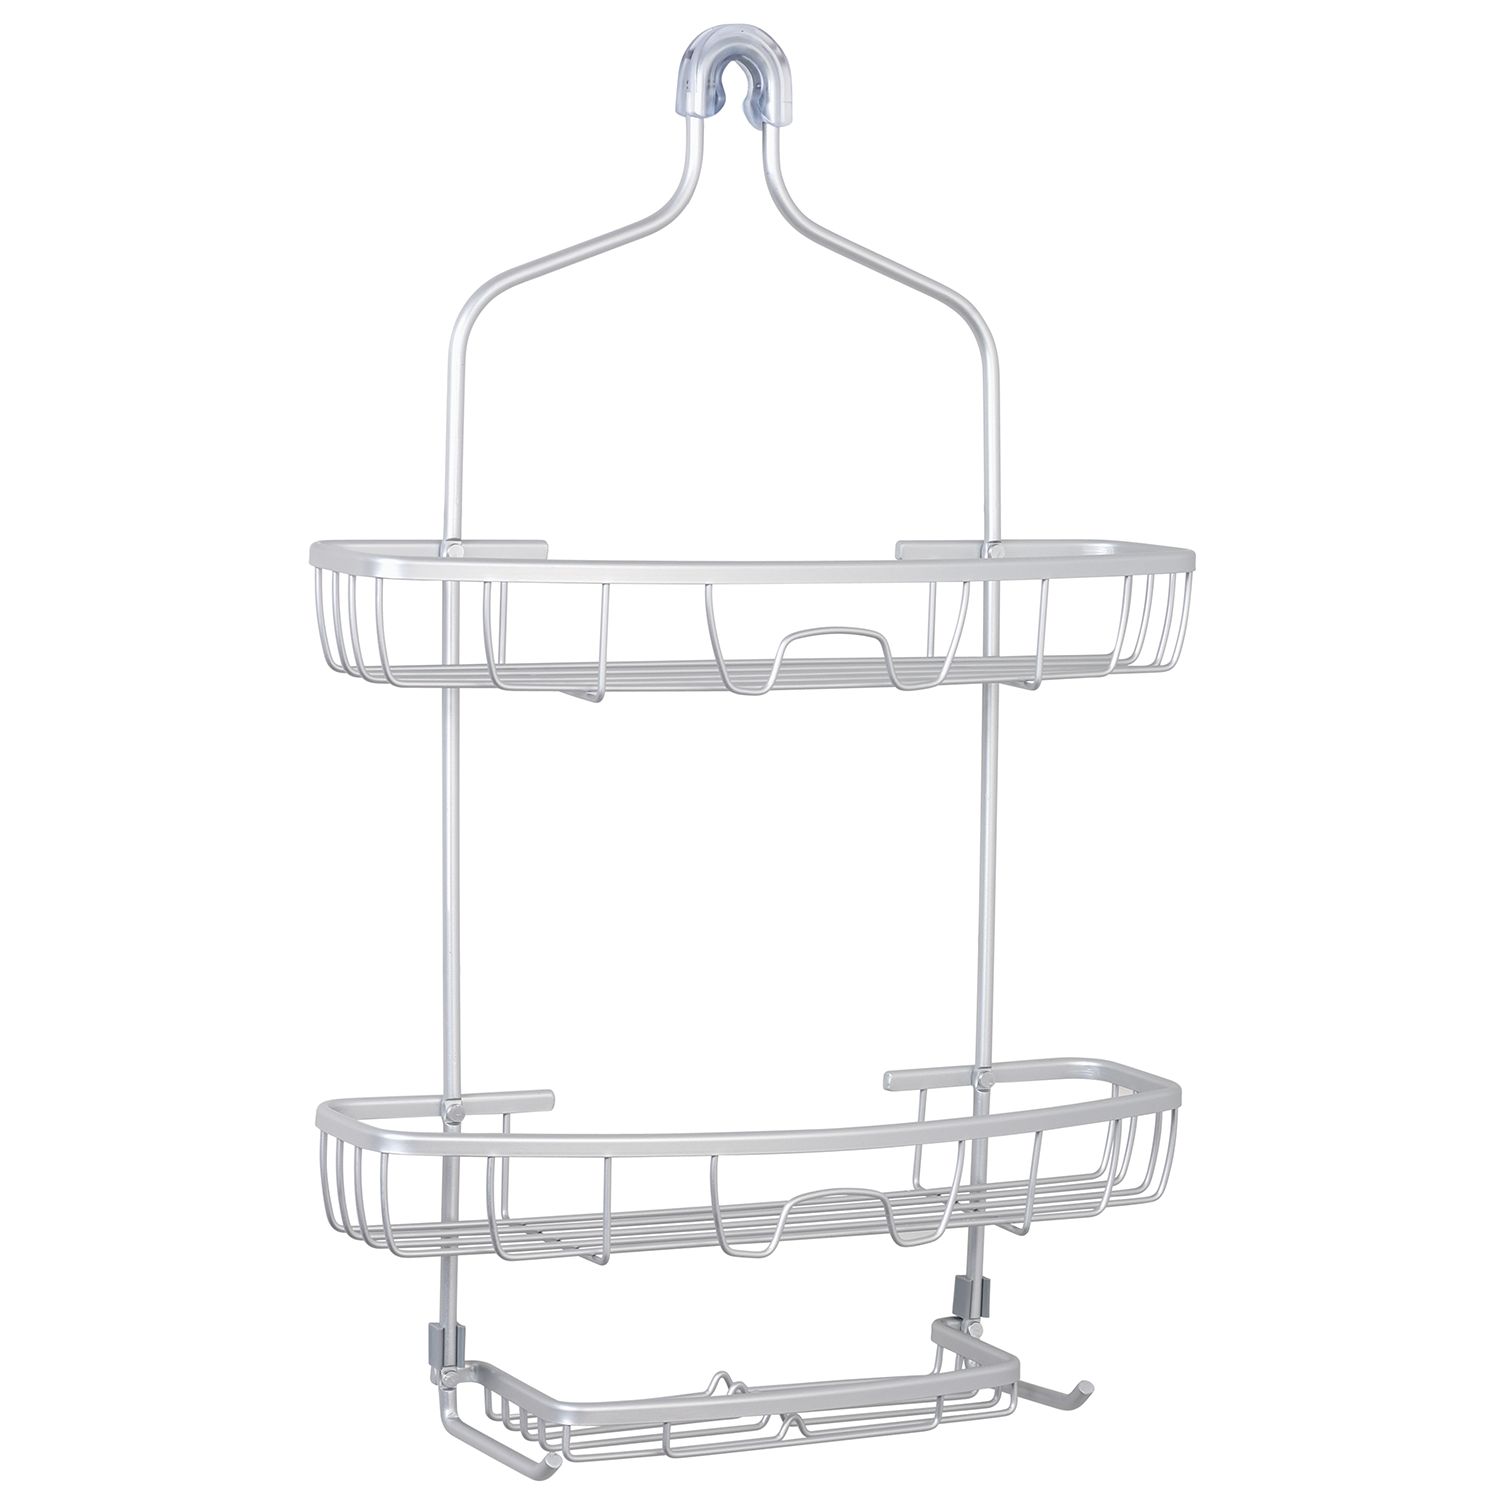 mDesign Metal Bathroom Shower Caddy Station, Brushed Stainless Steel